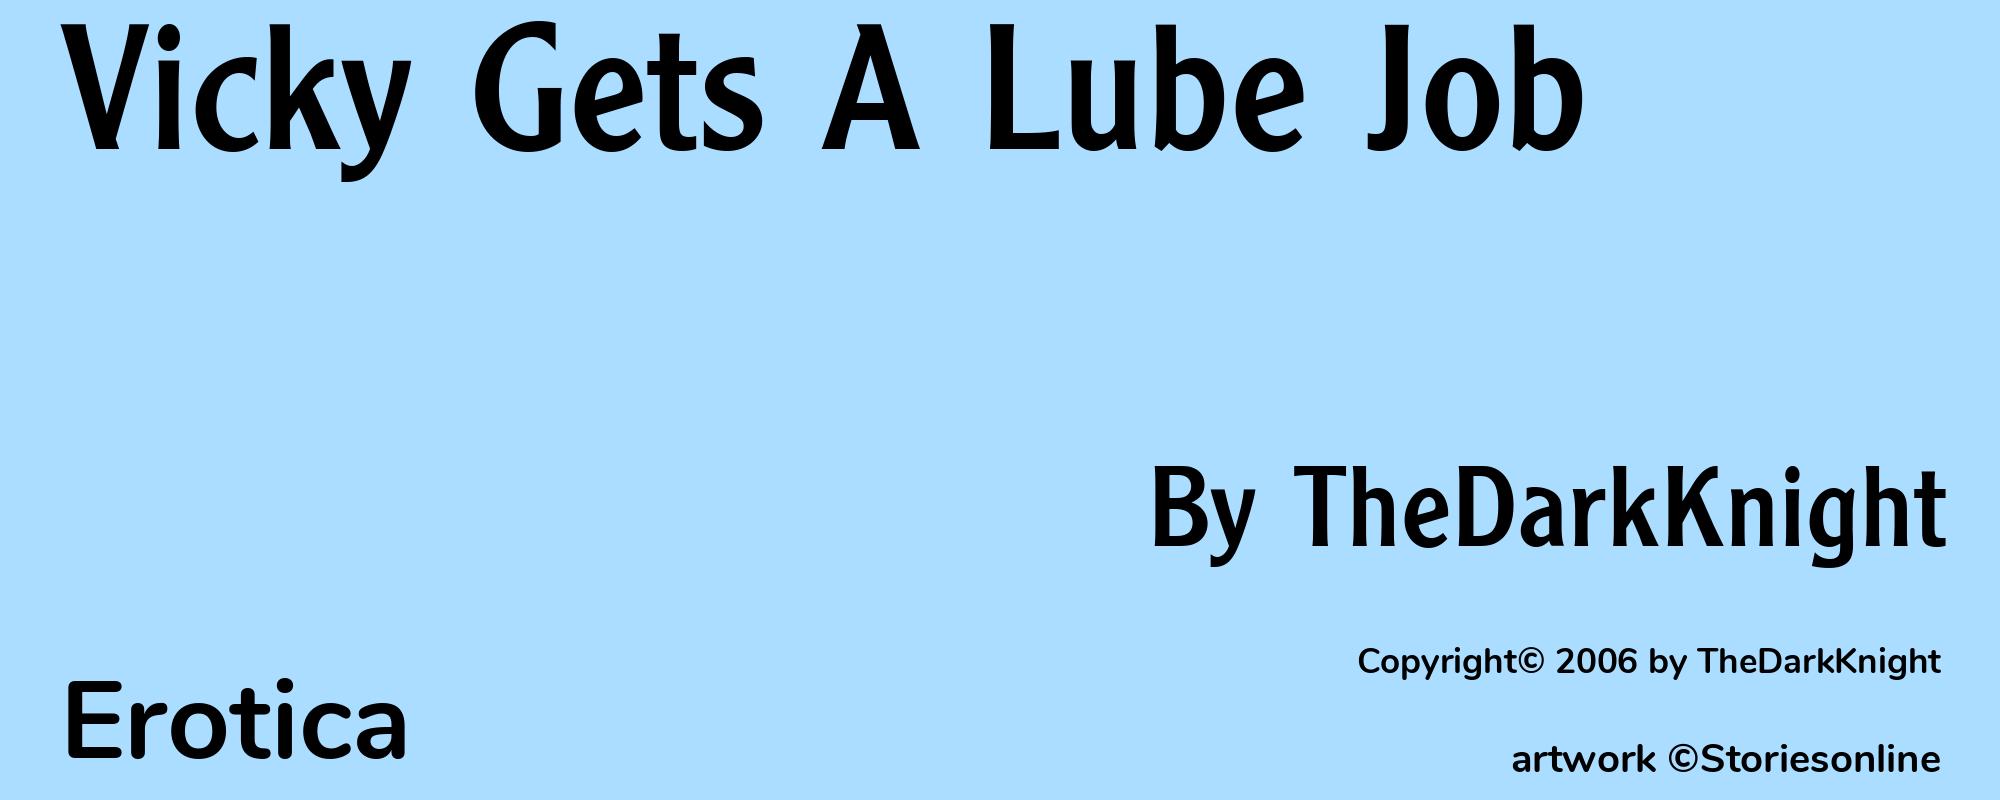 Vicky Gets A Lube Job - Cover